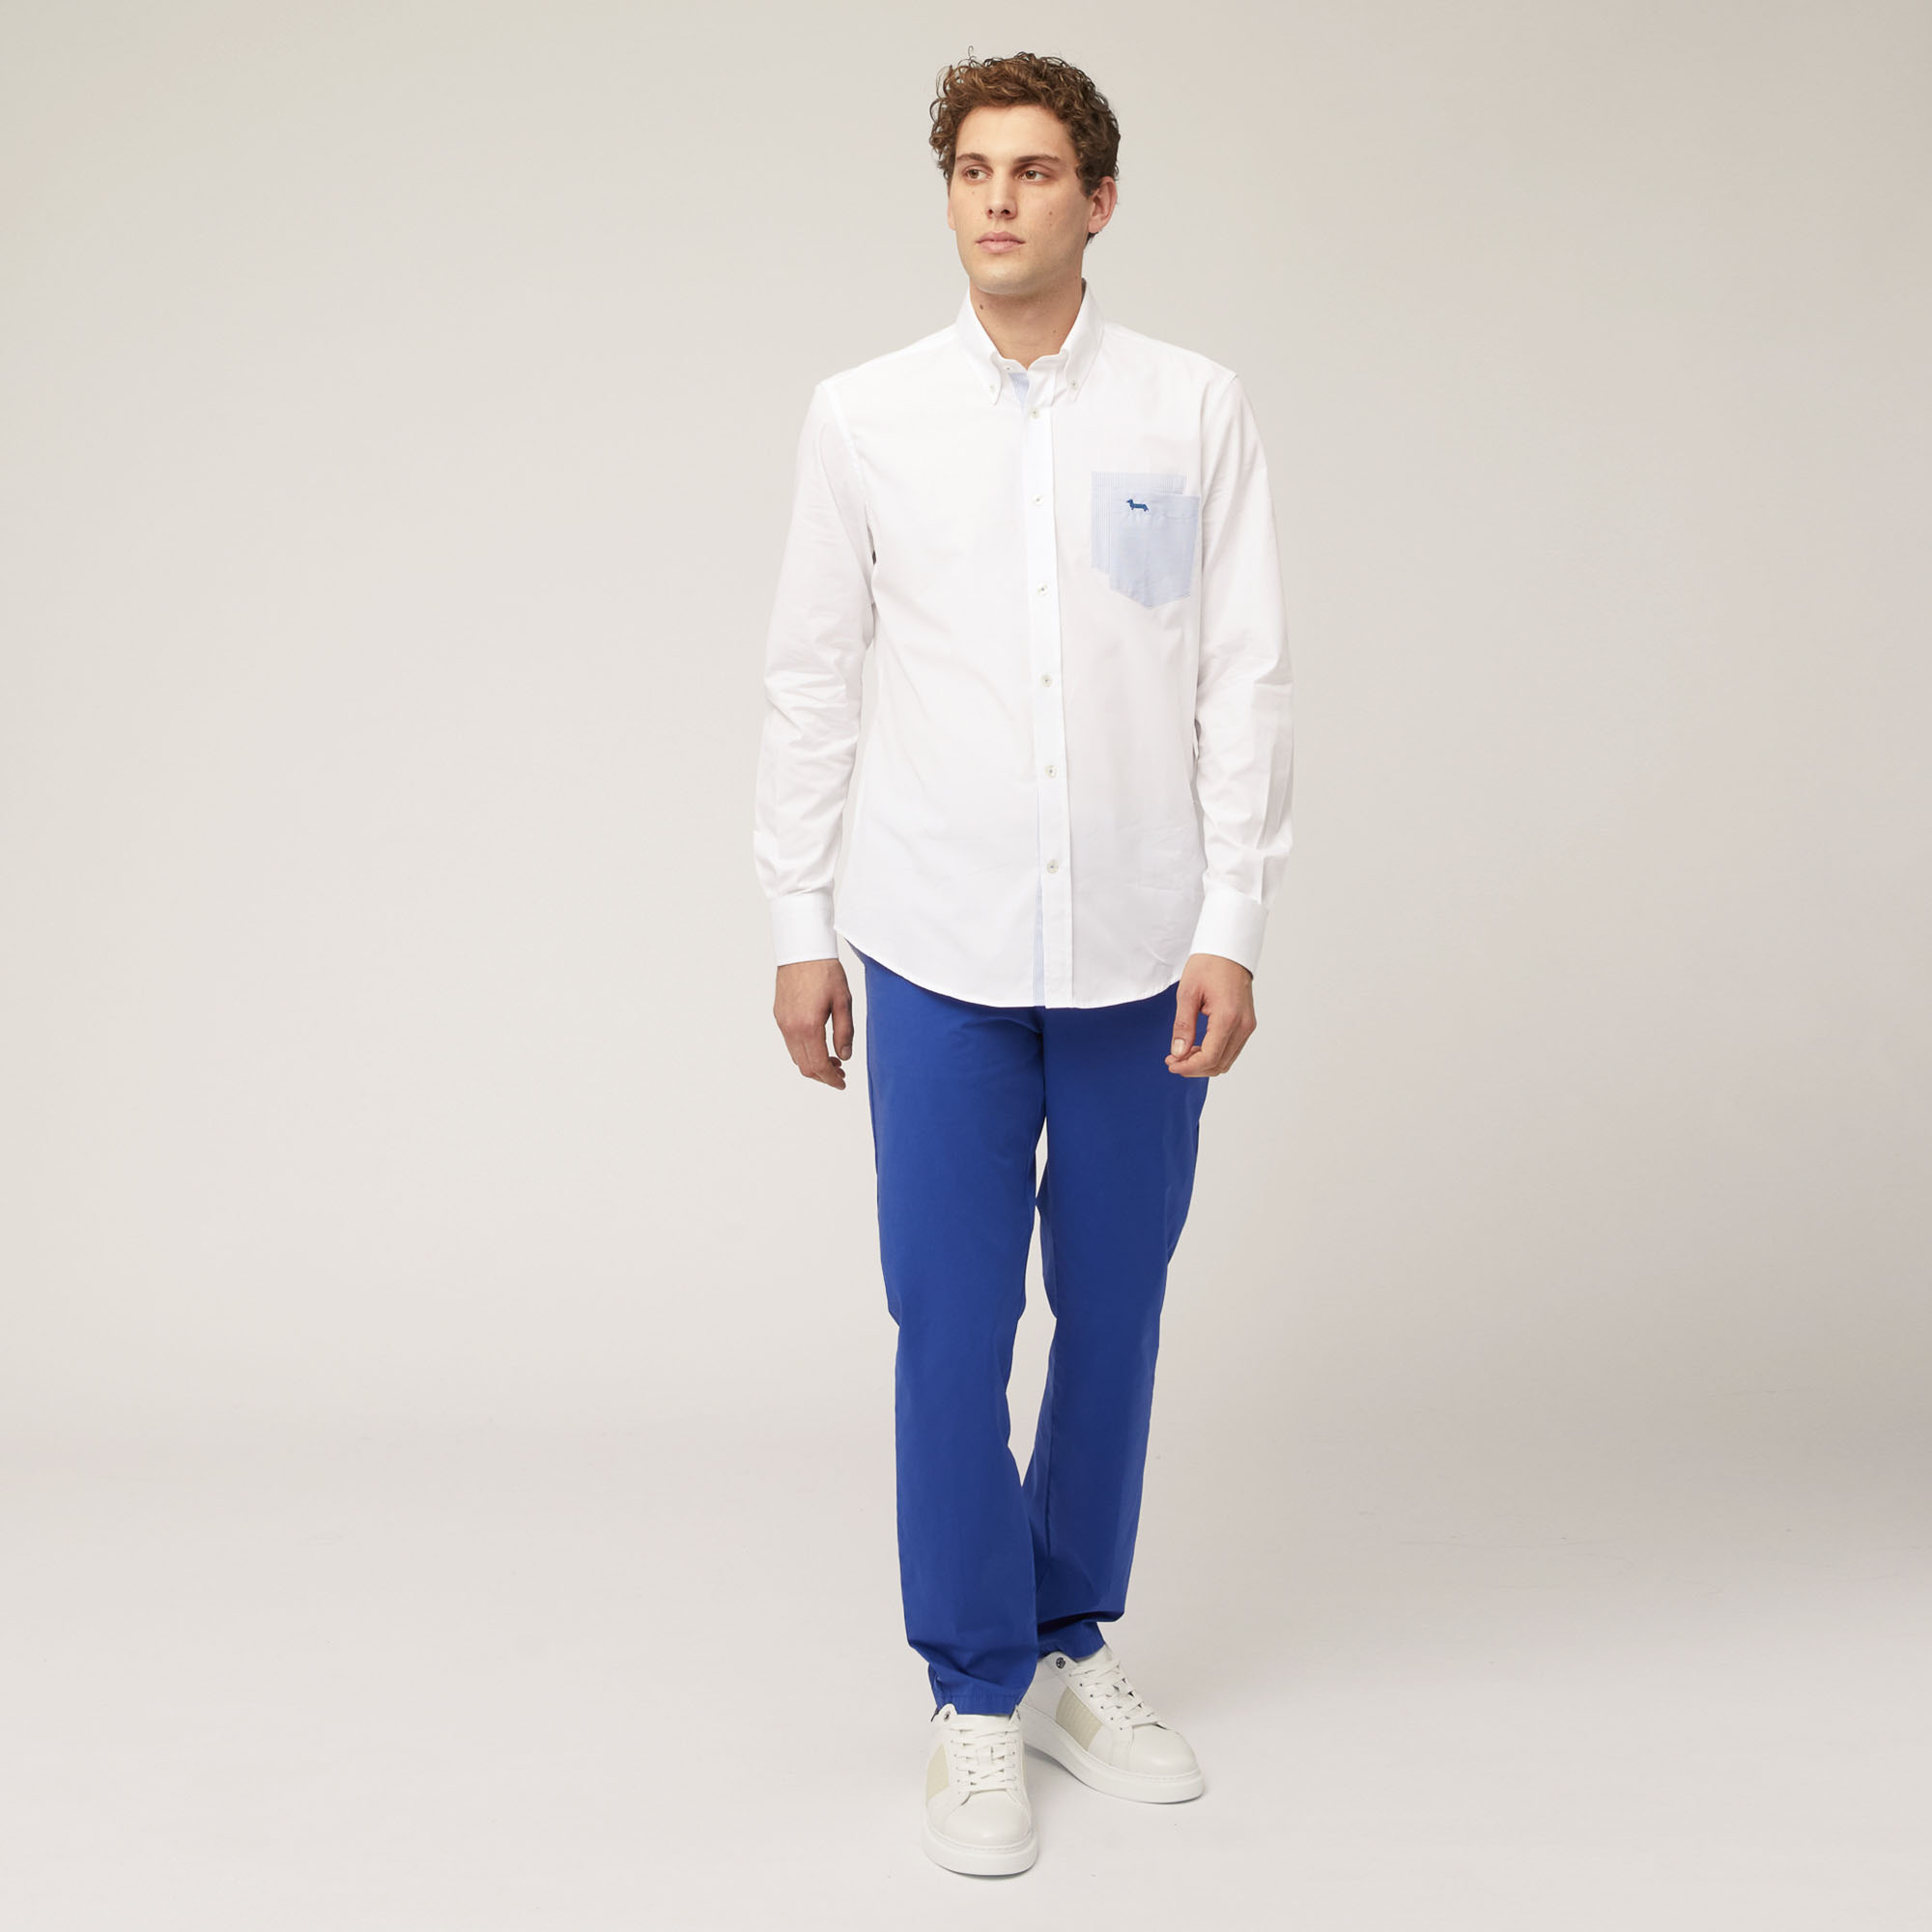 Cotton Shirt with Double Pocket, White, large image number 3